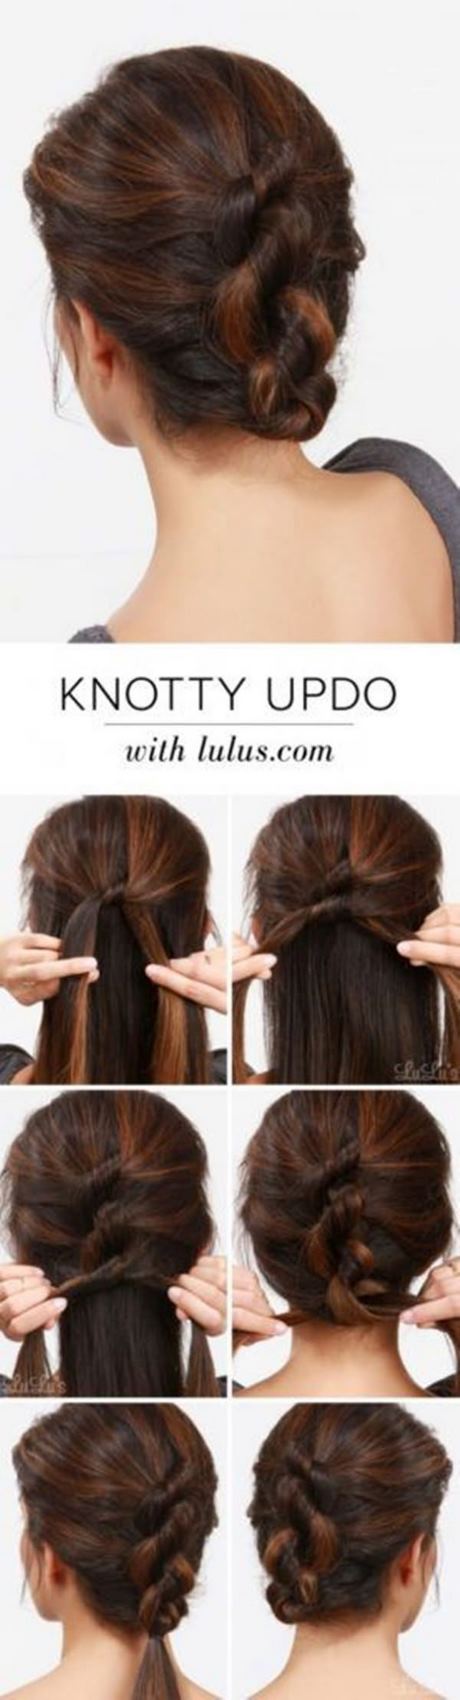 Formal updo hairstyles for long hair formal-updo-hairstyles-for-long-hair-92_11